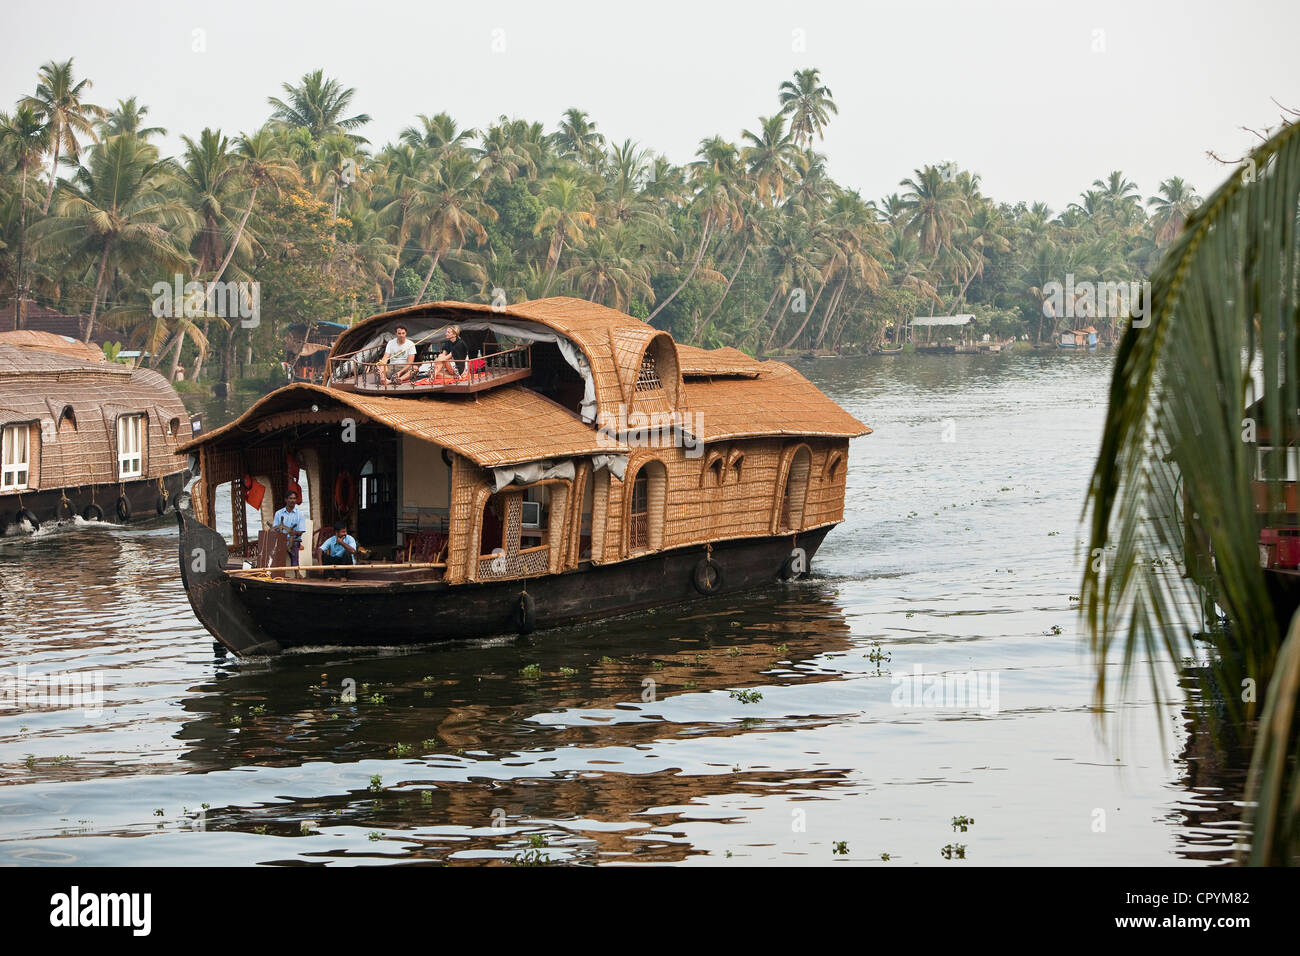 India Kerala State Allepey the backwaters houseboats (old transport barge converted for the touristic cruising of the canals) Stock Photo